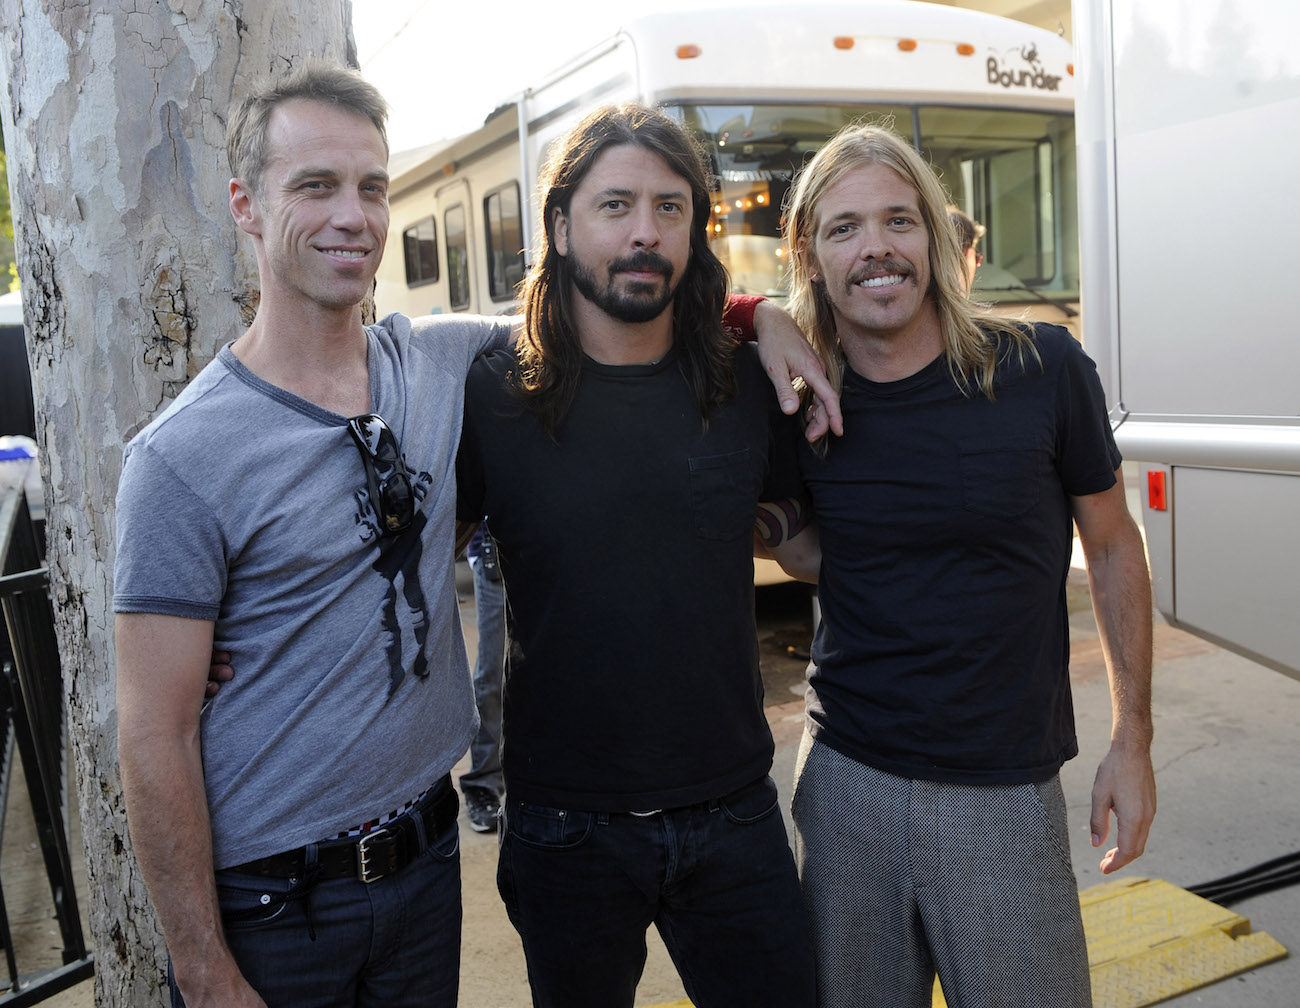 Matt Cameron, Dave Grohl, and Taylor Hawkins backstage at the 2008 VH1 Rock Honors.